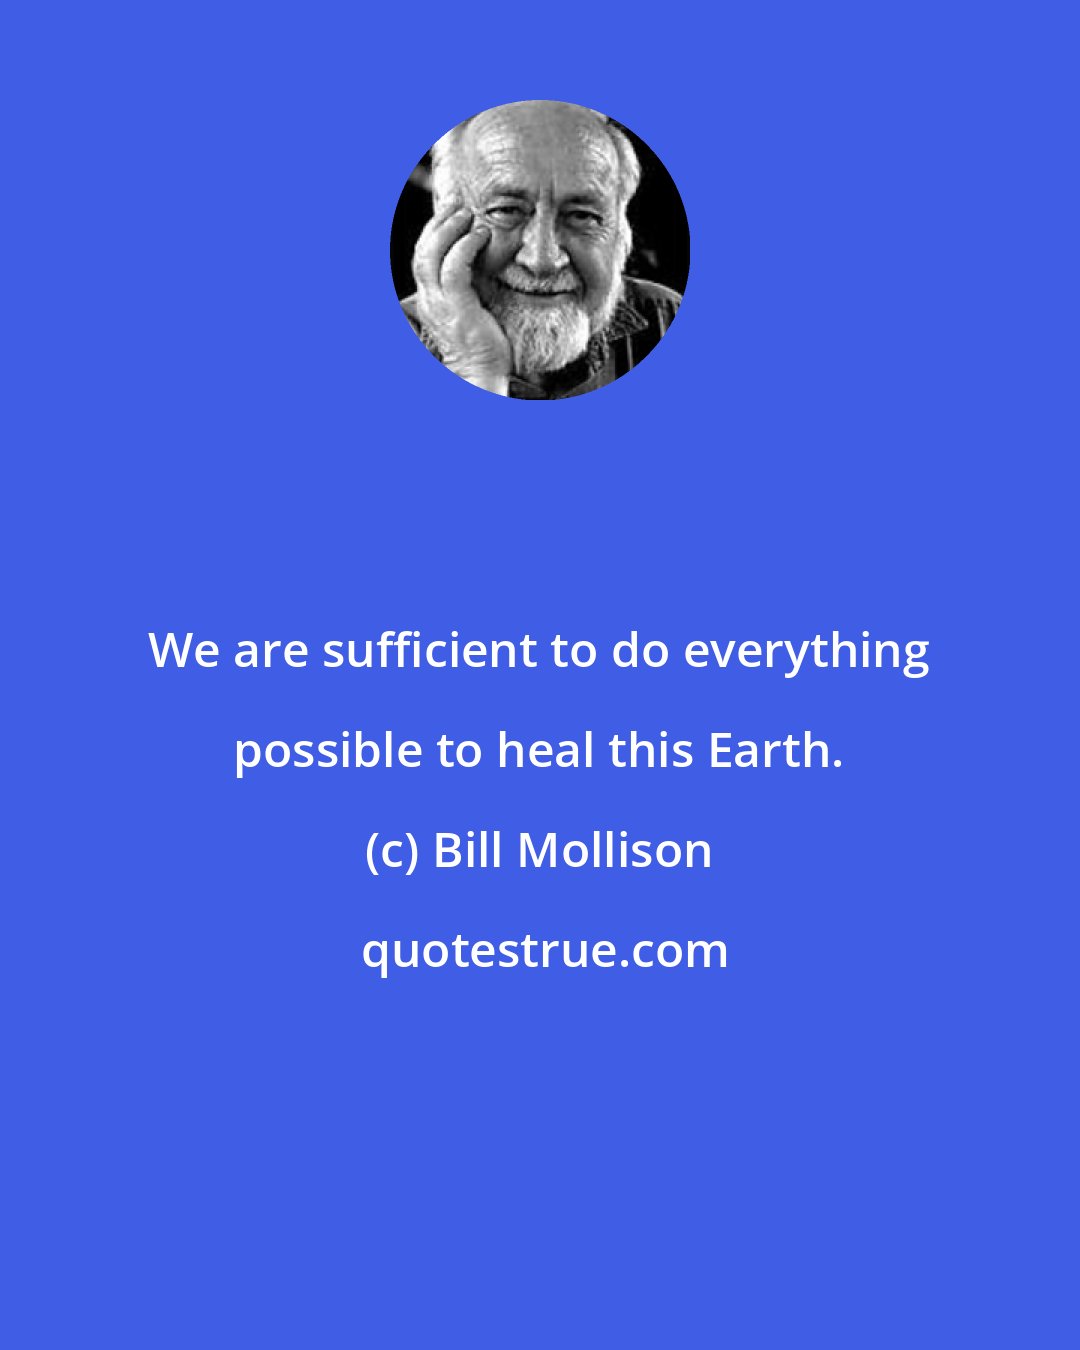 Bill Mollison: We are sufficient to do everything possible to heal this Earth.